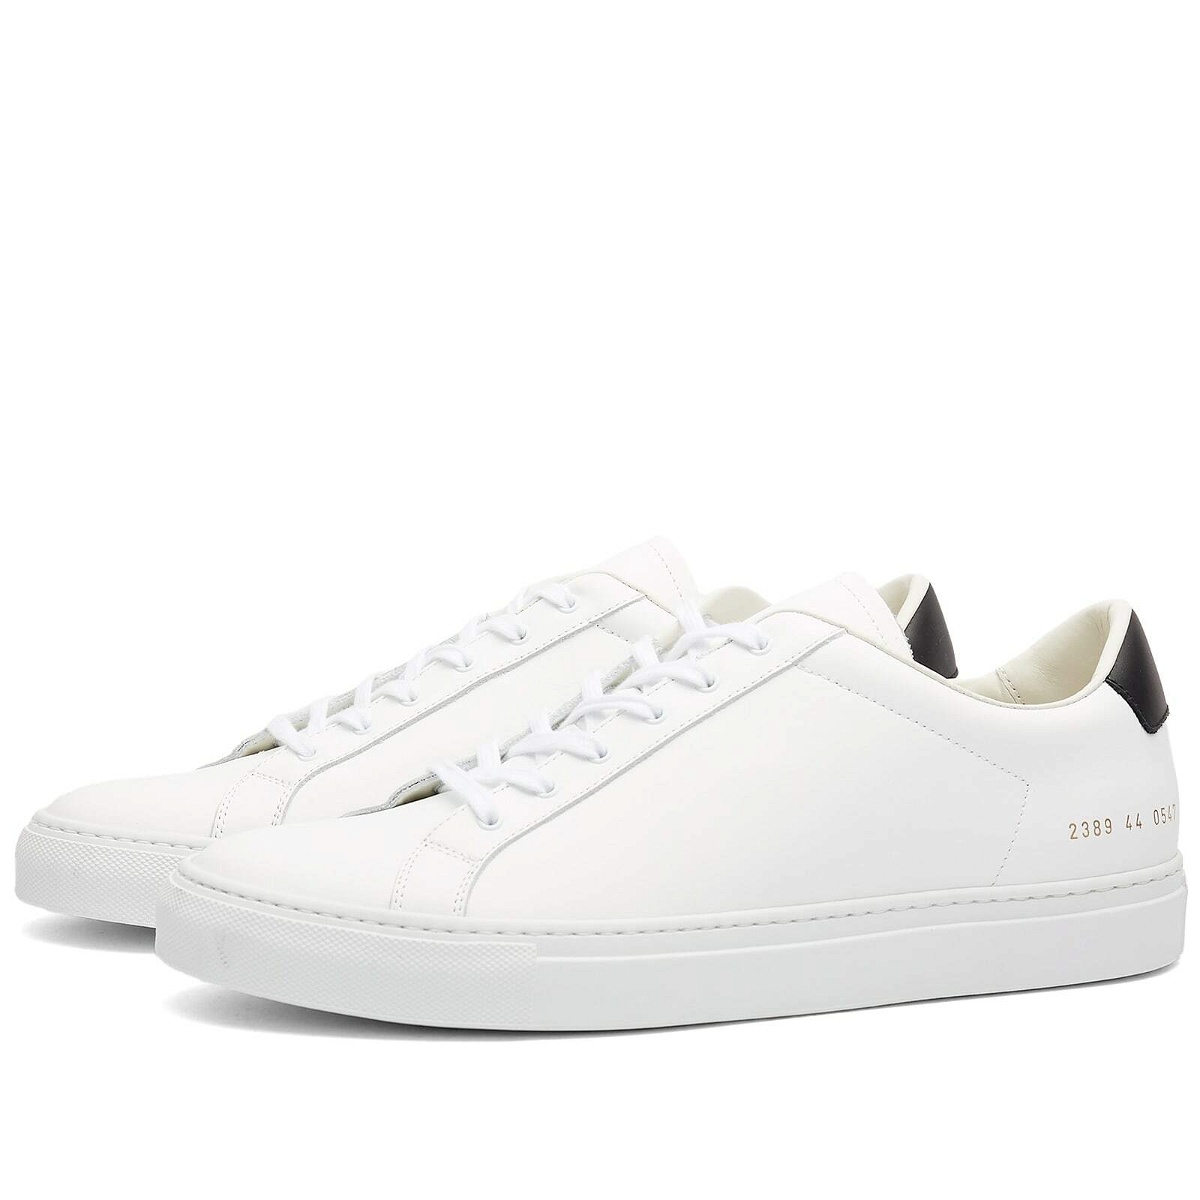 Common Projects Men's Retro Classic Low Sneakers in White/Black Common ...